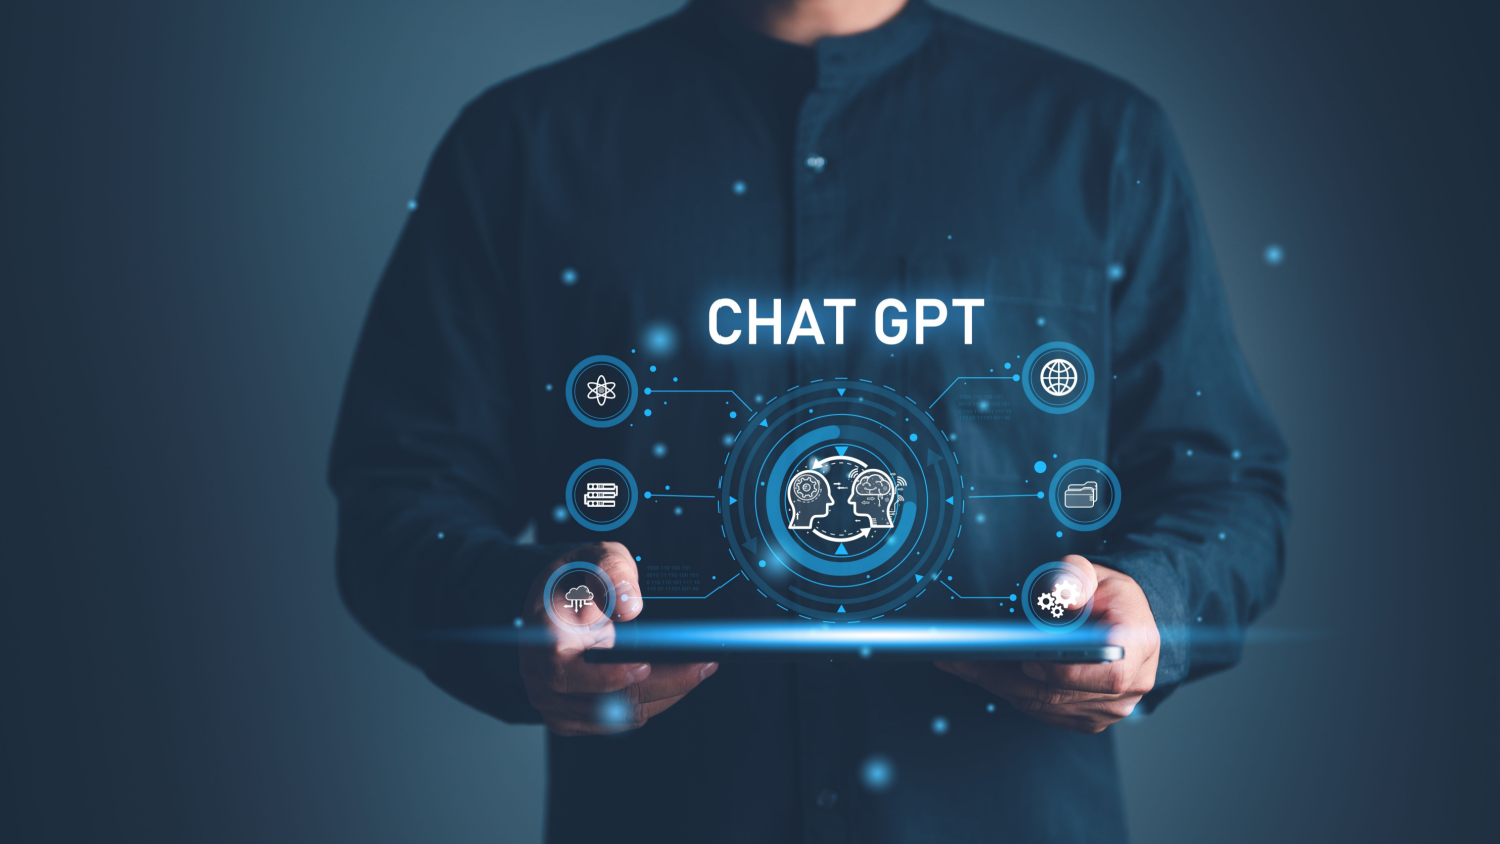 How Can Behavioral Health Services Leverage ChatGPT?